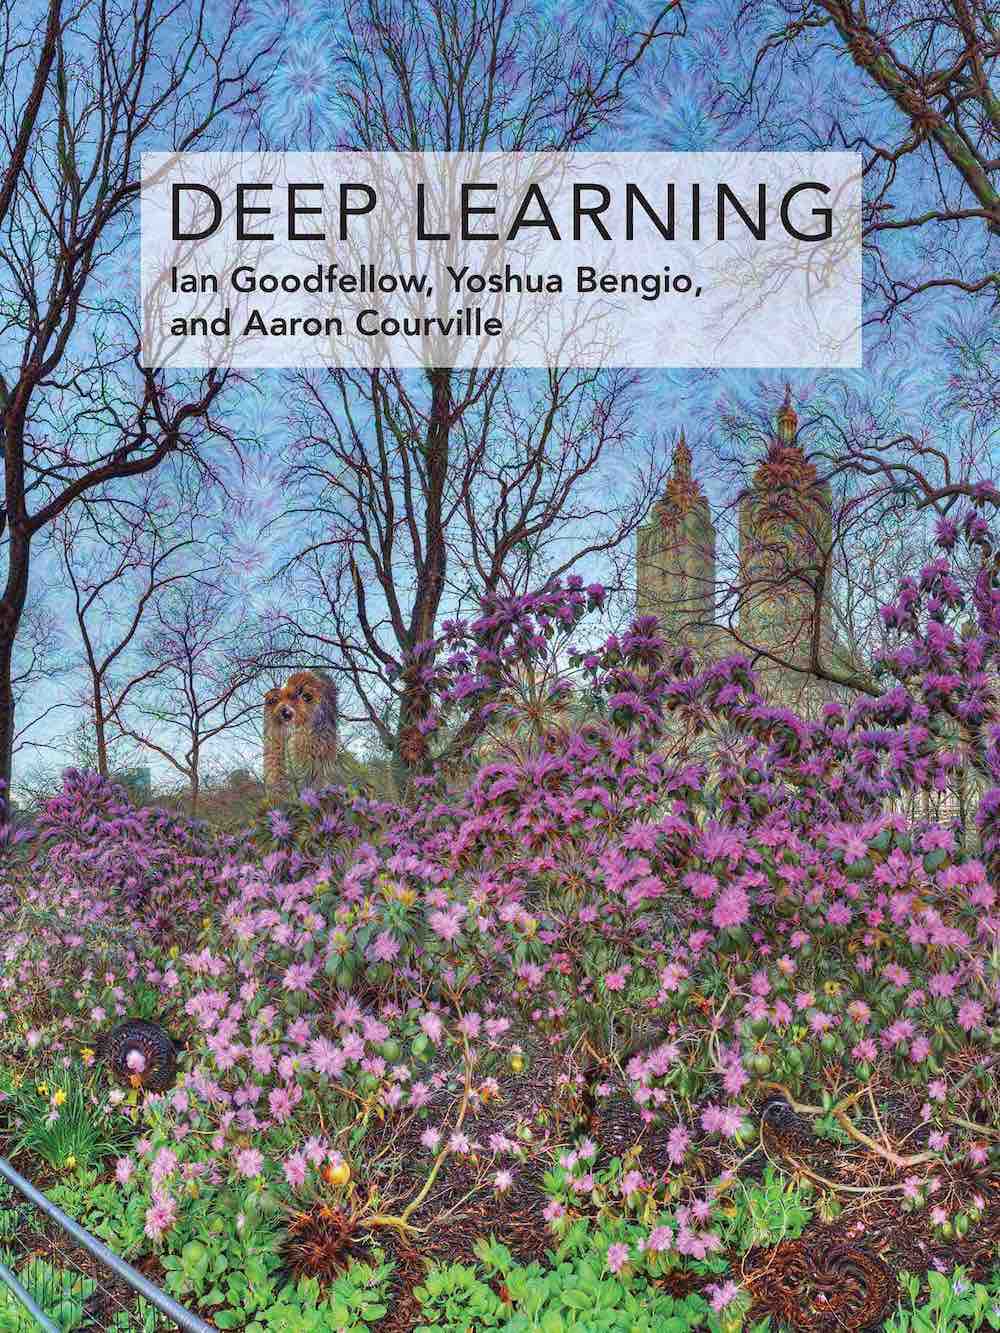 Cover of the deep learning book by Goodfellow, Bengio and Courville